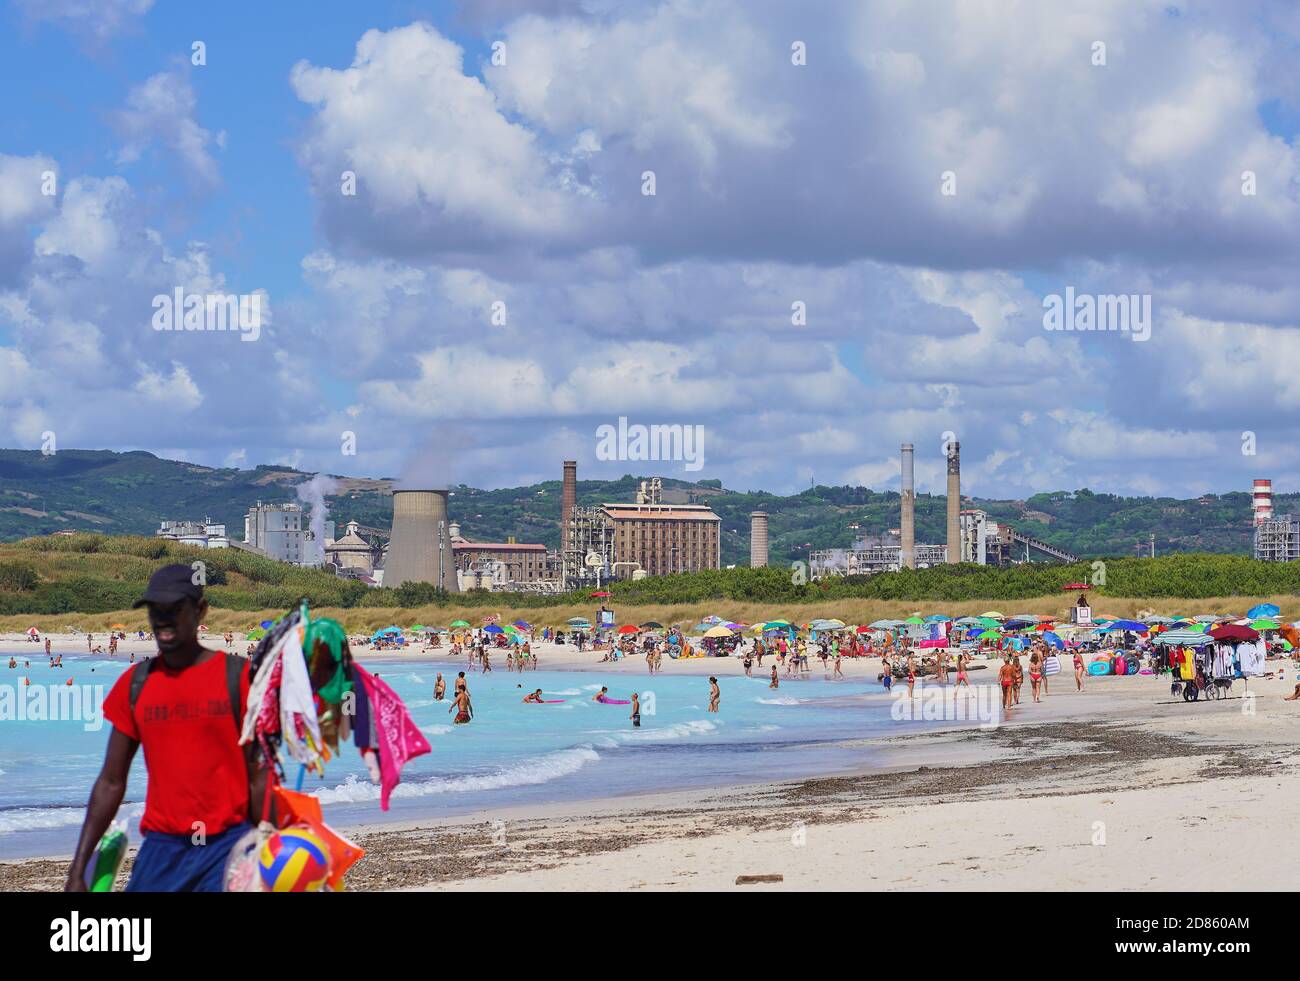 Tourists and local people enjoy “Spiagge Bianche”, the White Sand Beach in Rosignano Solvay, Italy, 1rd September, 2020. The beach is said to be highly toxic due to chemical pollution of a nearby factory in the 1990th, but still its a tourist attraction. © Peter Schatz / Alamy Stock Photos Stock Photo